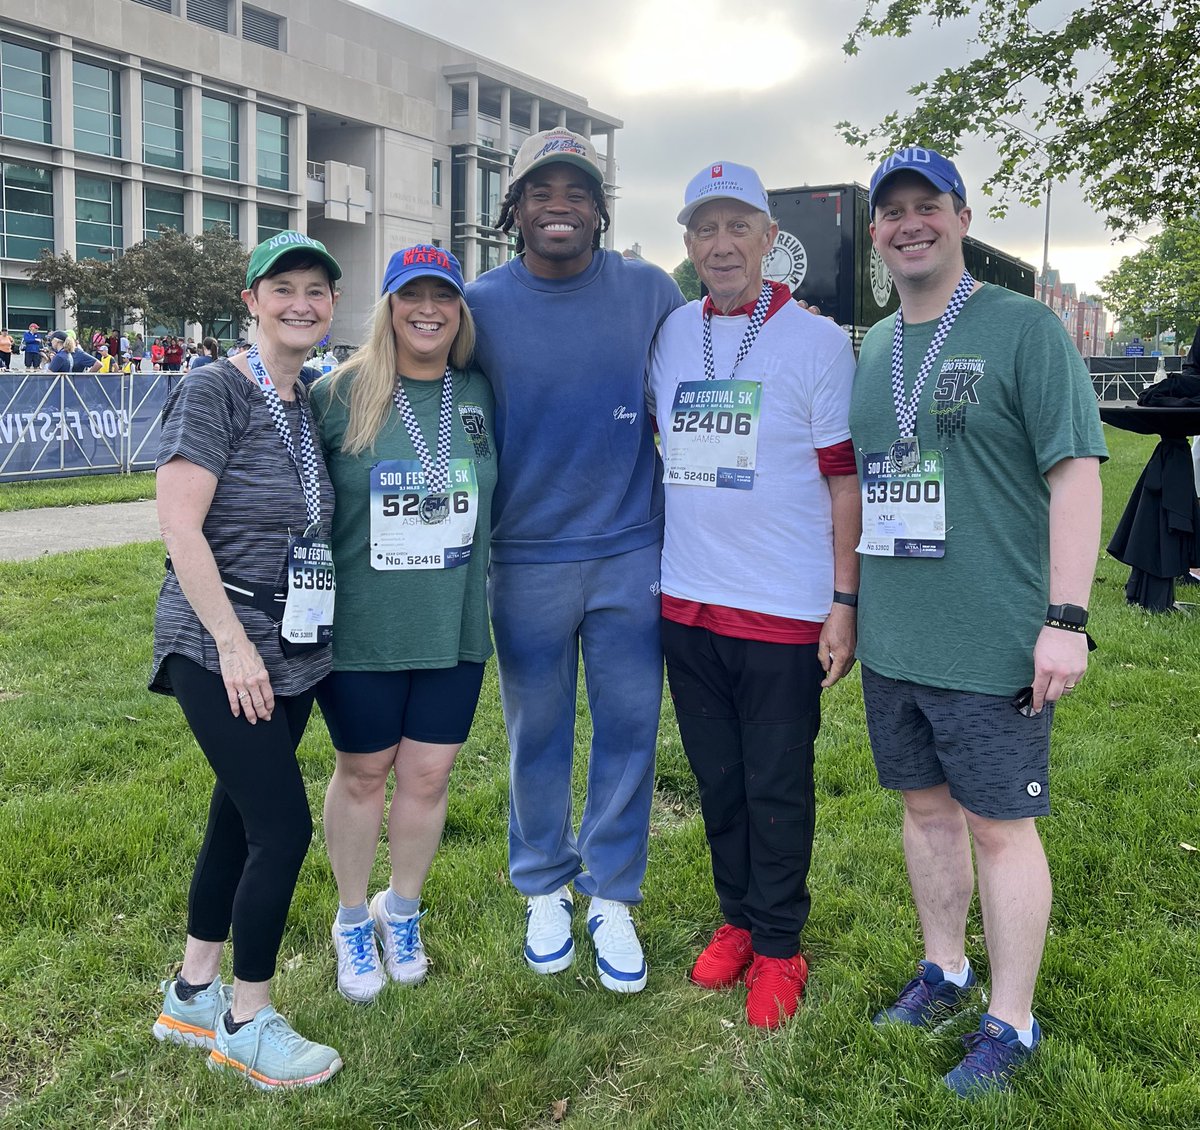 Kudos @500Festival friends on another perfect #IndyMini! 🏃‍♀️😎Family time & great chat with the kindest, @KennyKennyMoe3.